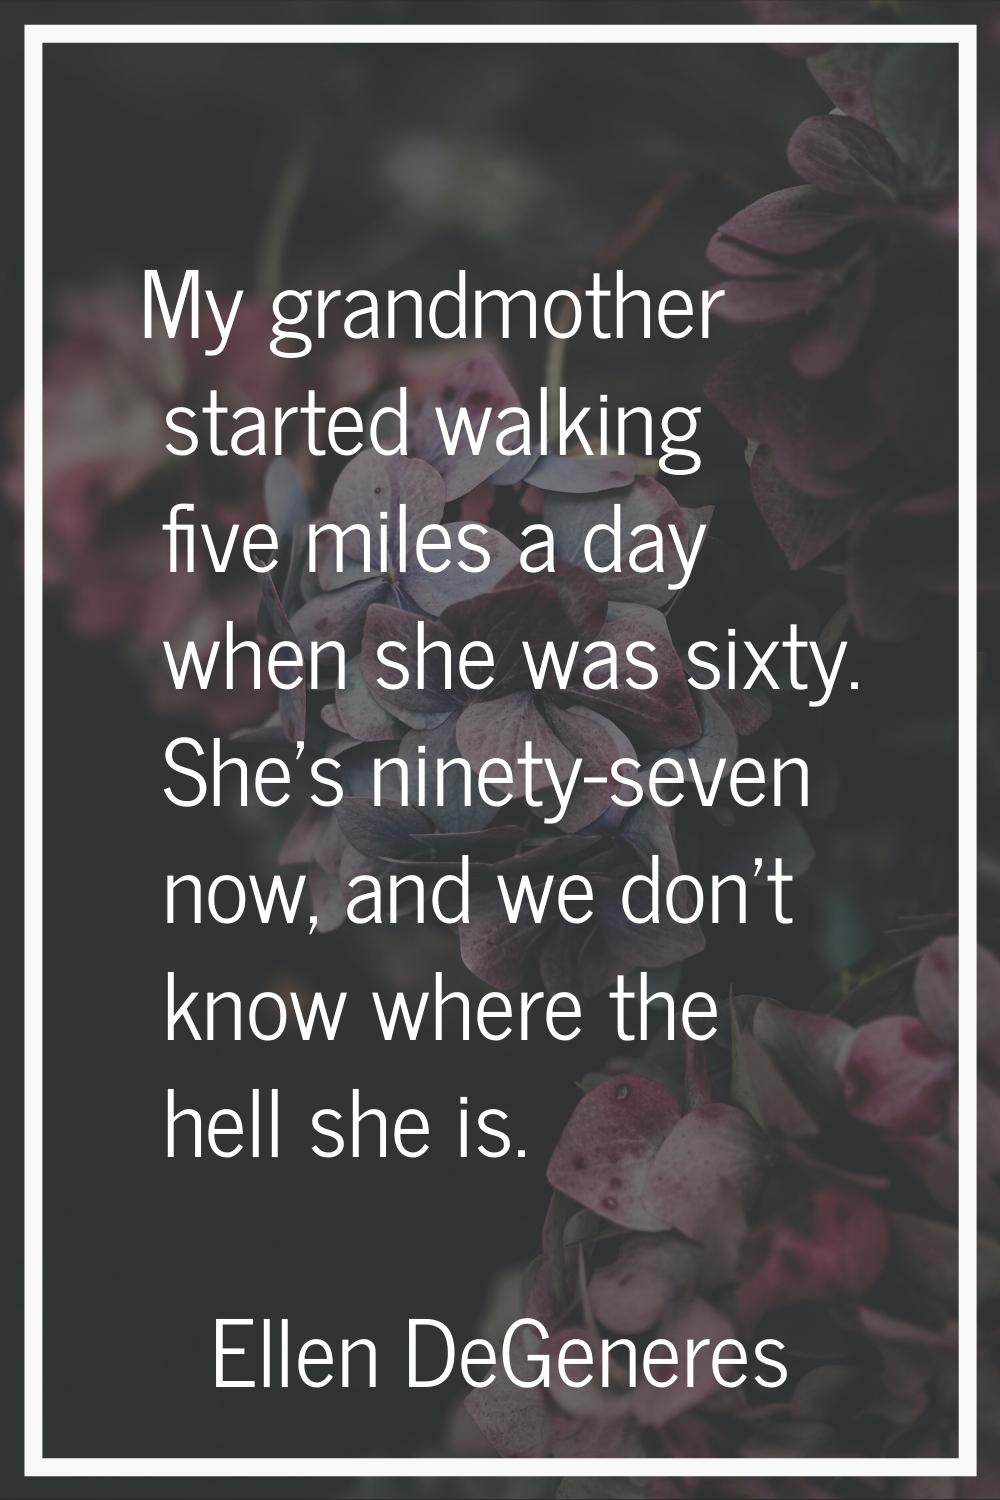 My grandmother started walking five miles a day when she was sixty. She's ninety-seven now, and we 